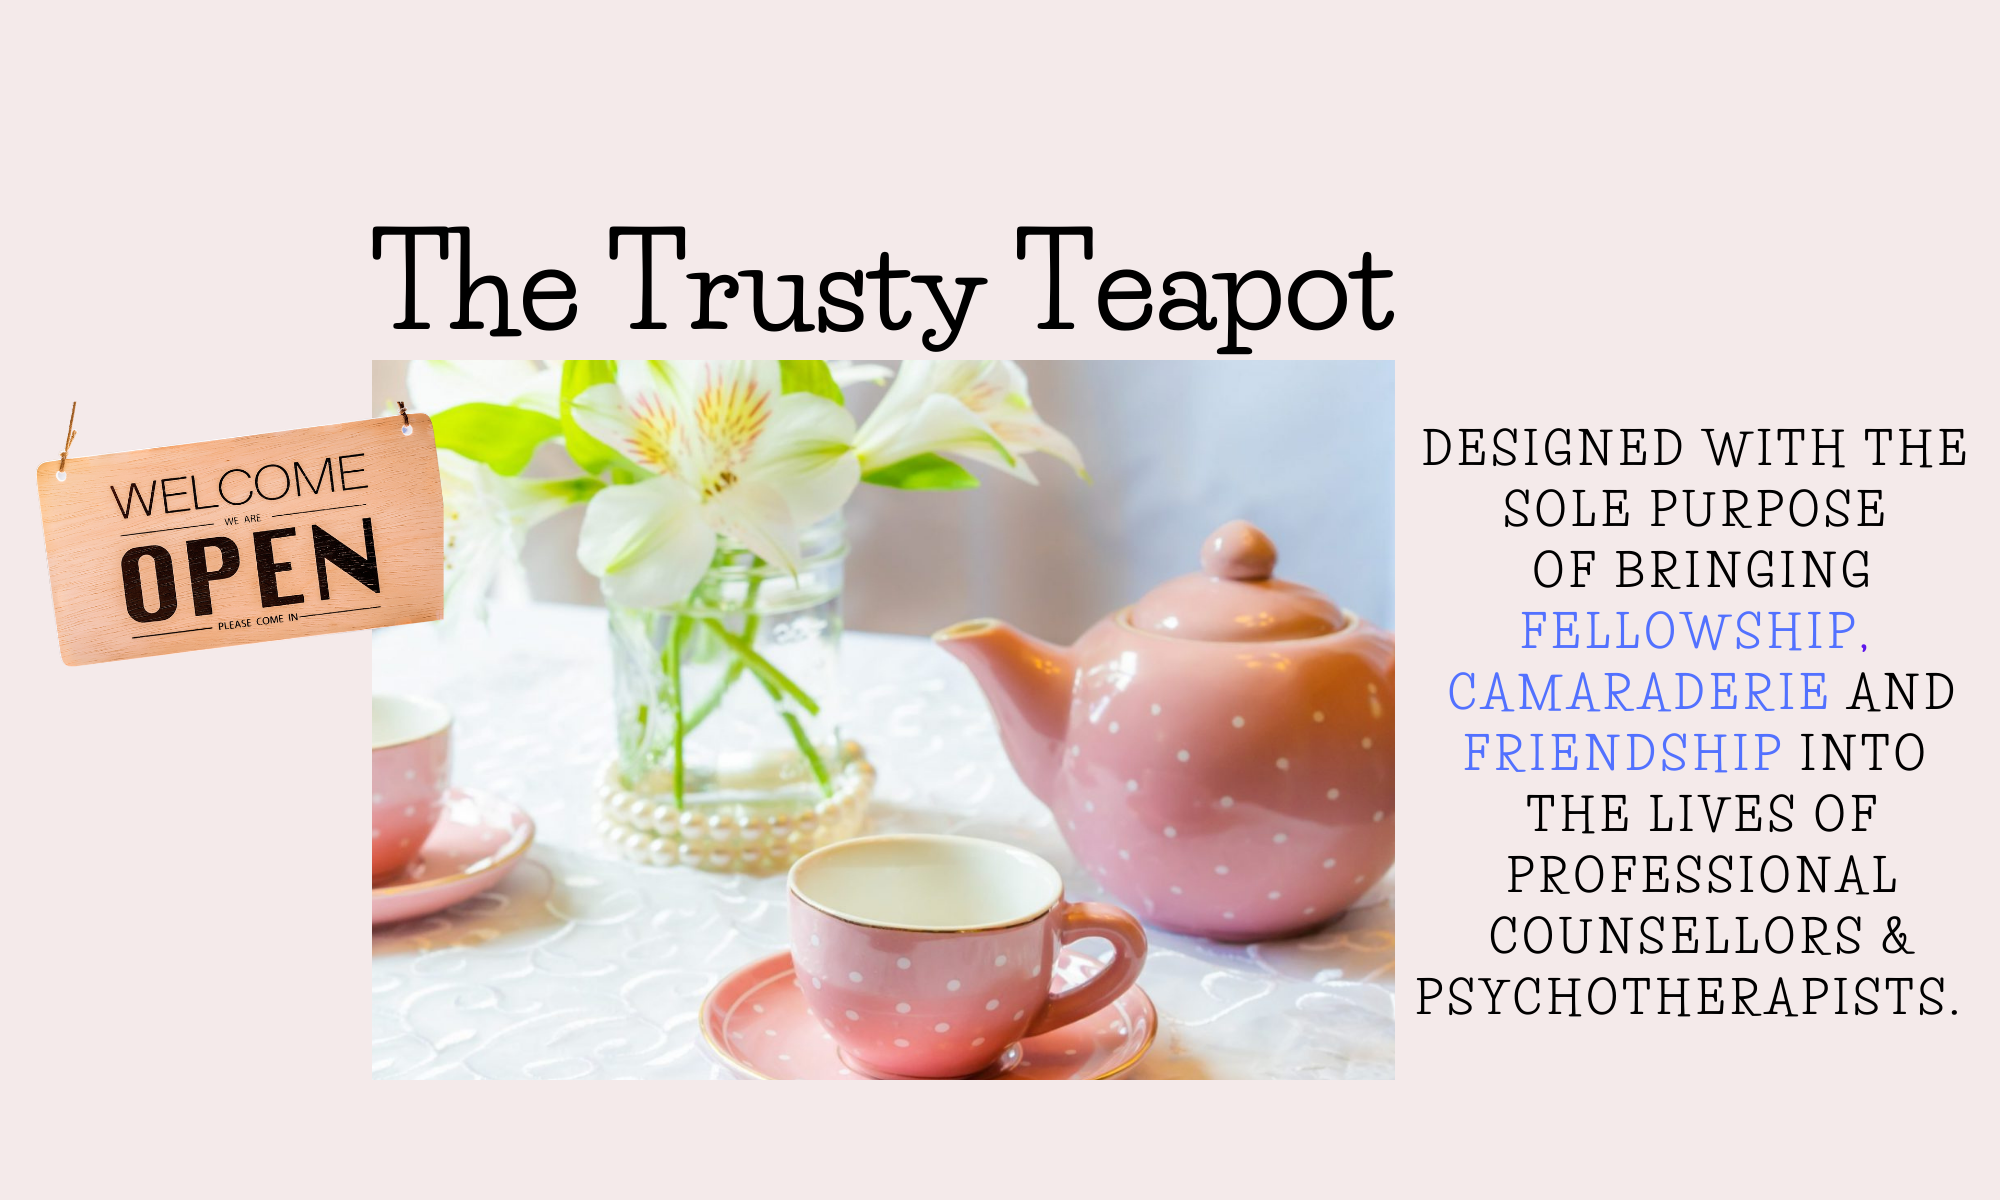 The Trusty Teapot Bringing Fellowship and Camaraderie to Counsellors and Psychotherapists